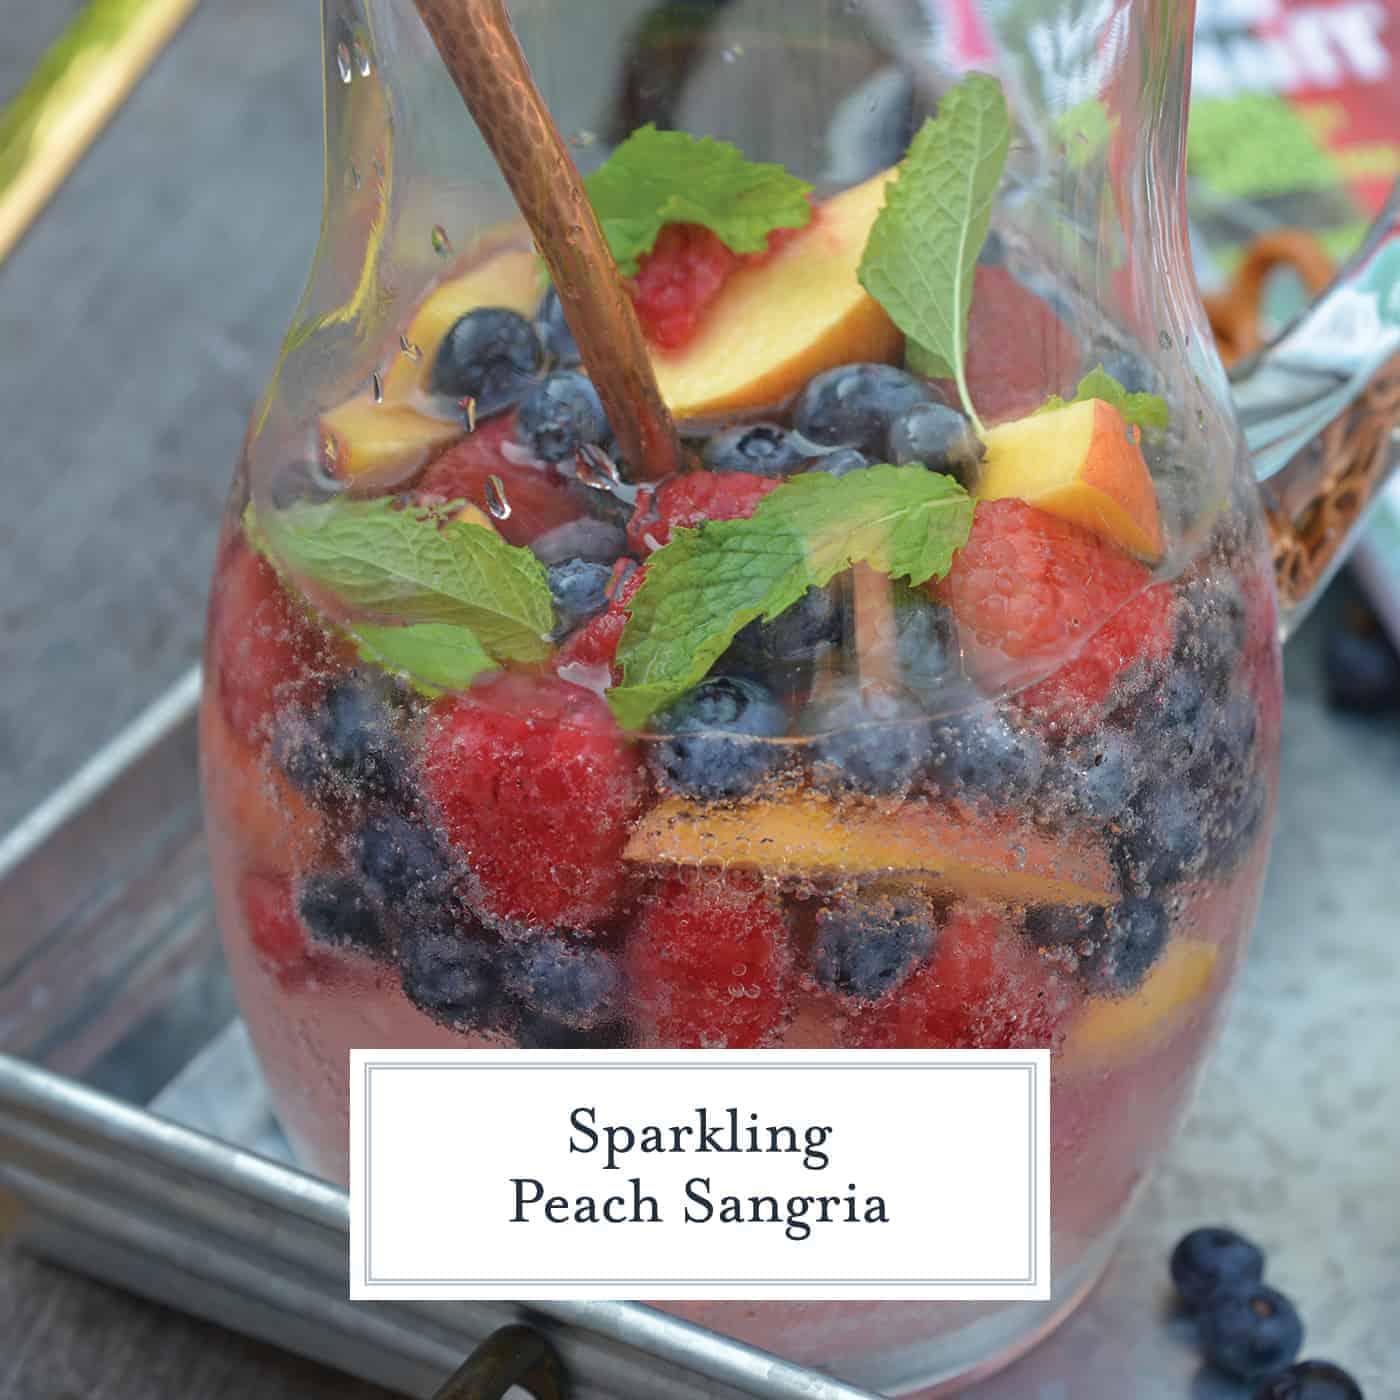 Sparkling Peach Sangria is the perfect summer cocktail recipe for your next party! Make a non-alcoholic and alcoholic version with fresh summer fruits. #sangriarecipe #sparklingsangria www.savoryexperiments.com